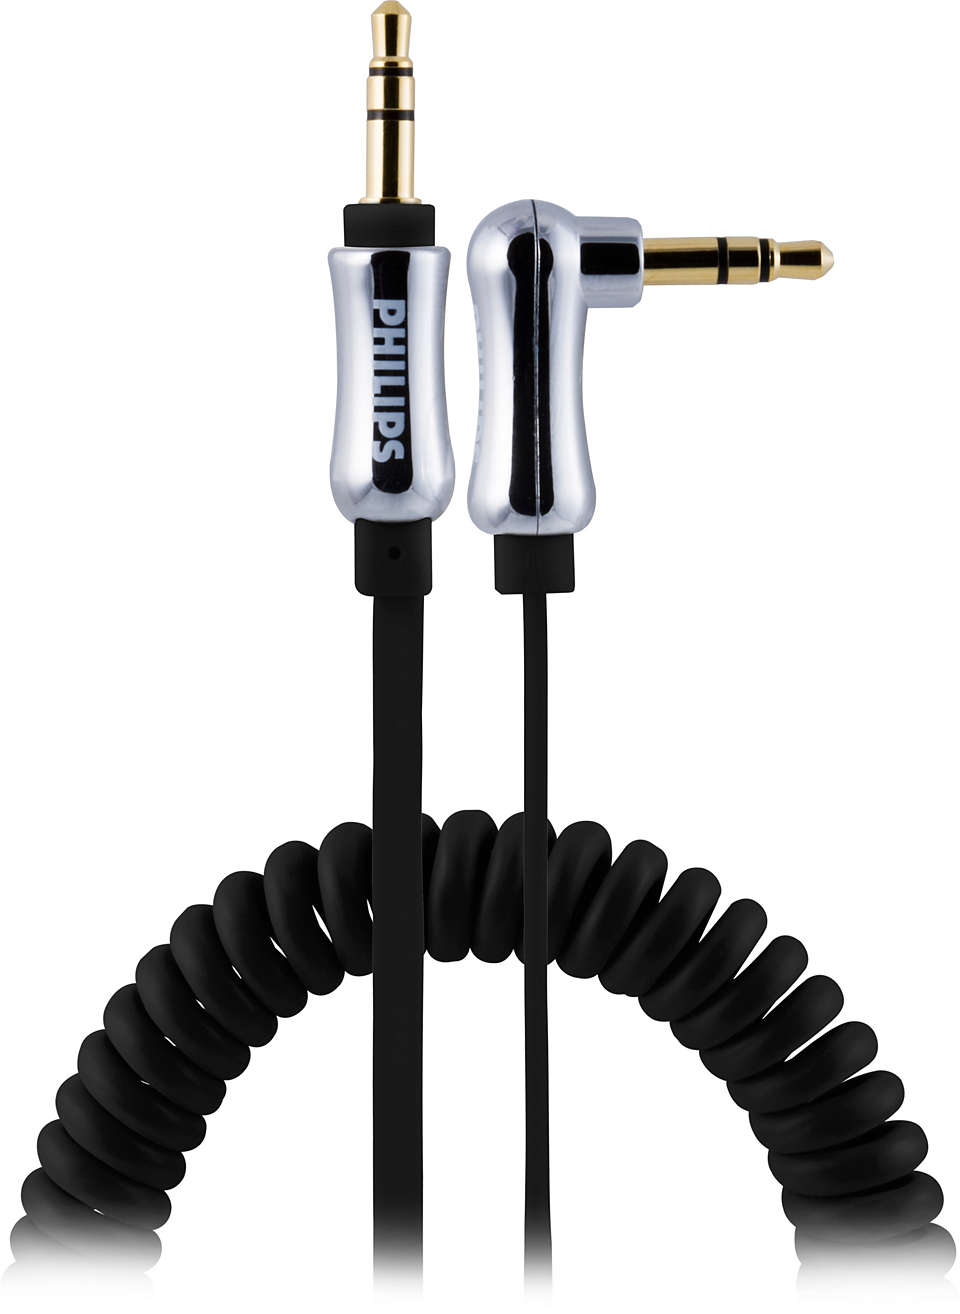 Audio 3.5mm cable